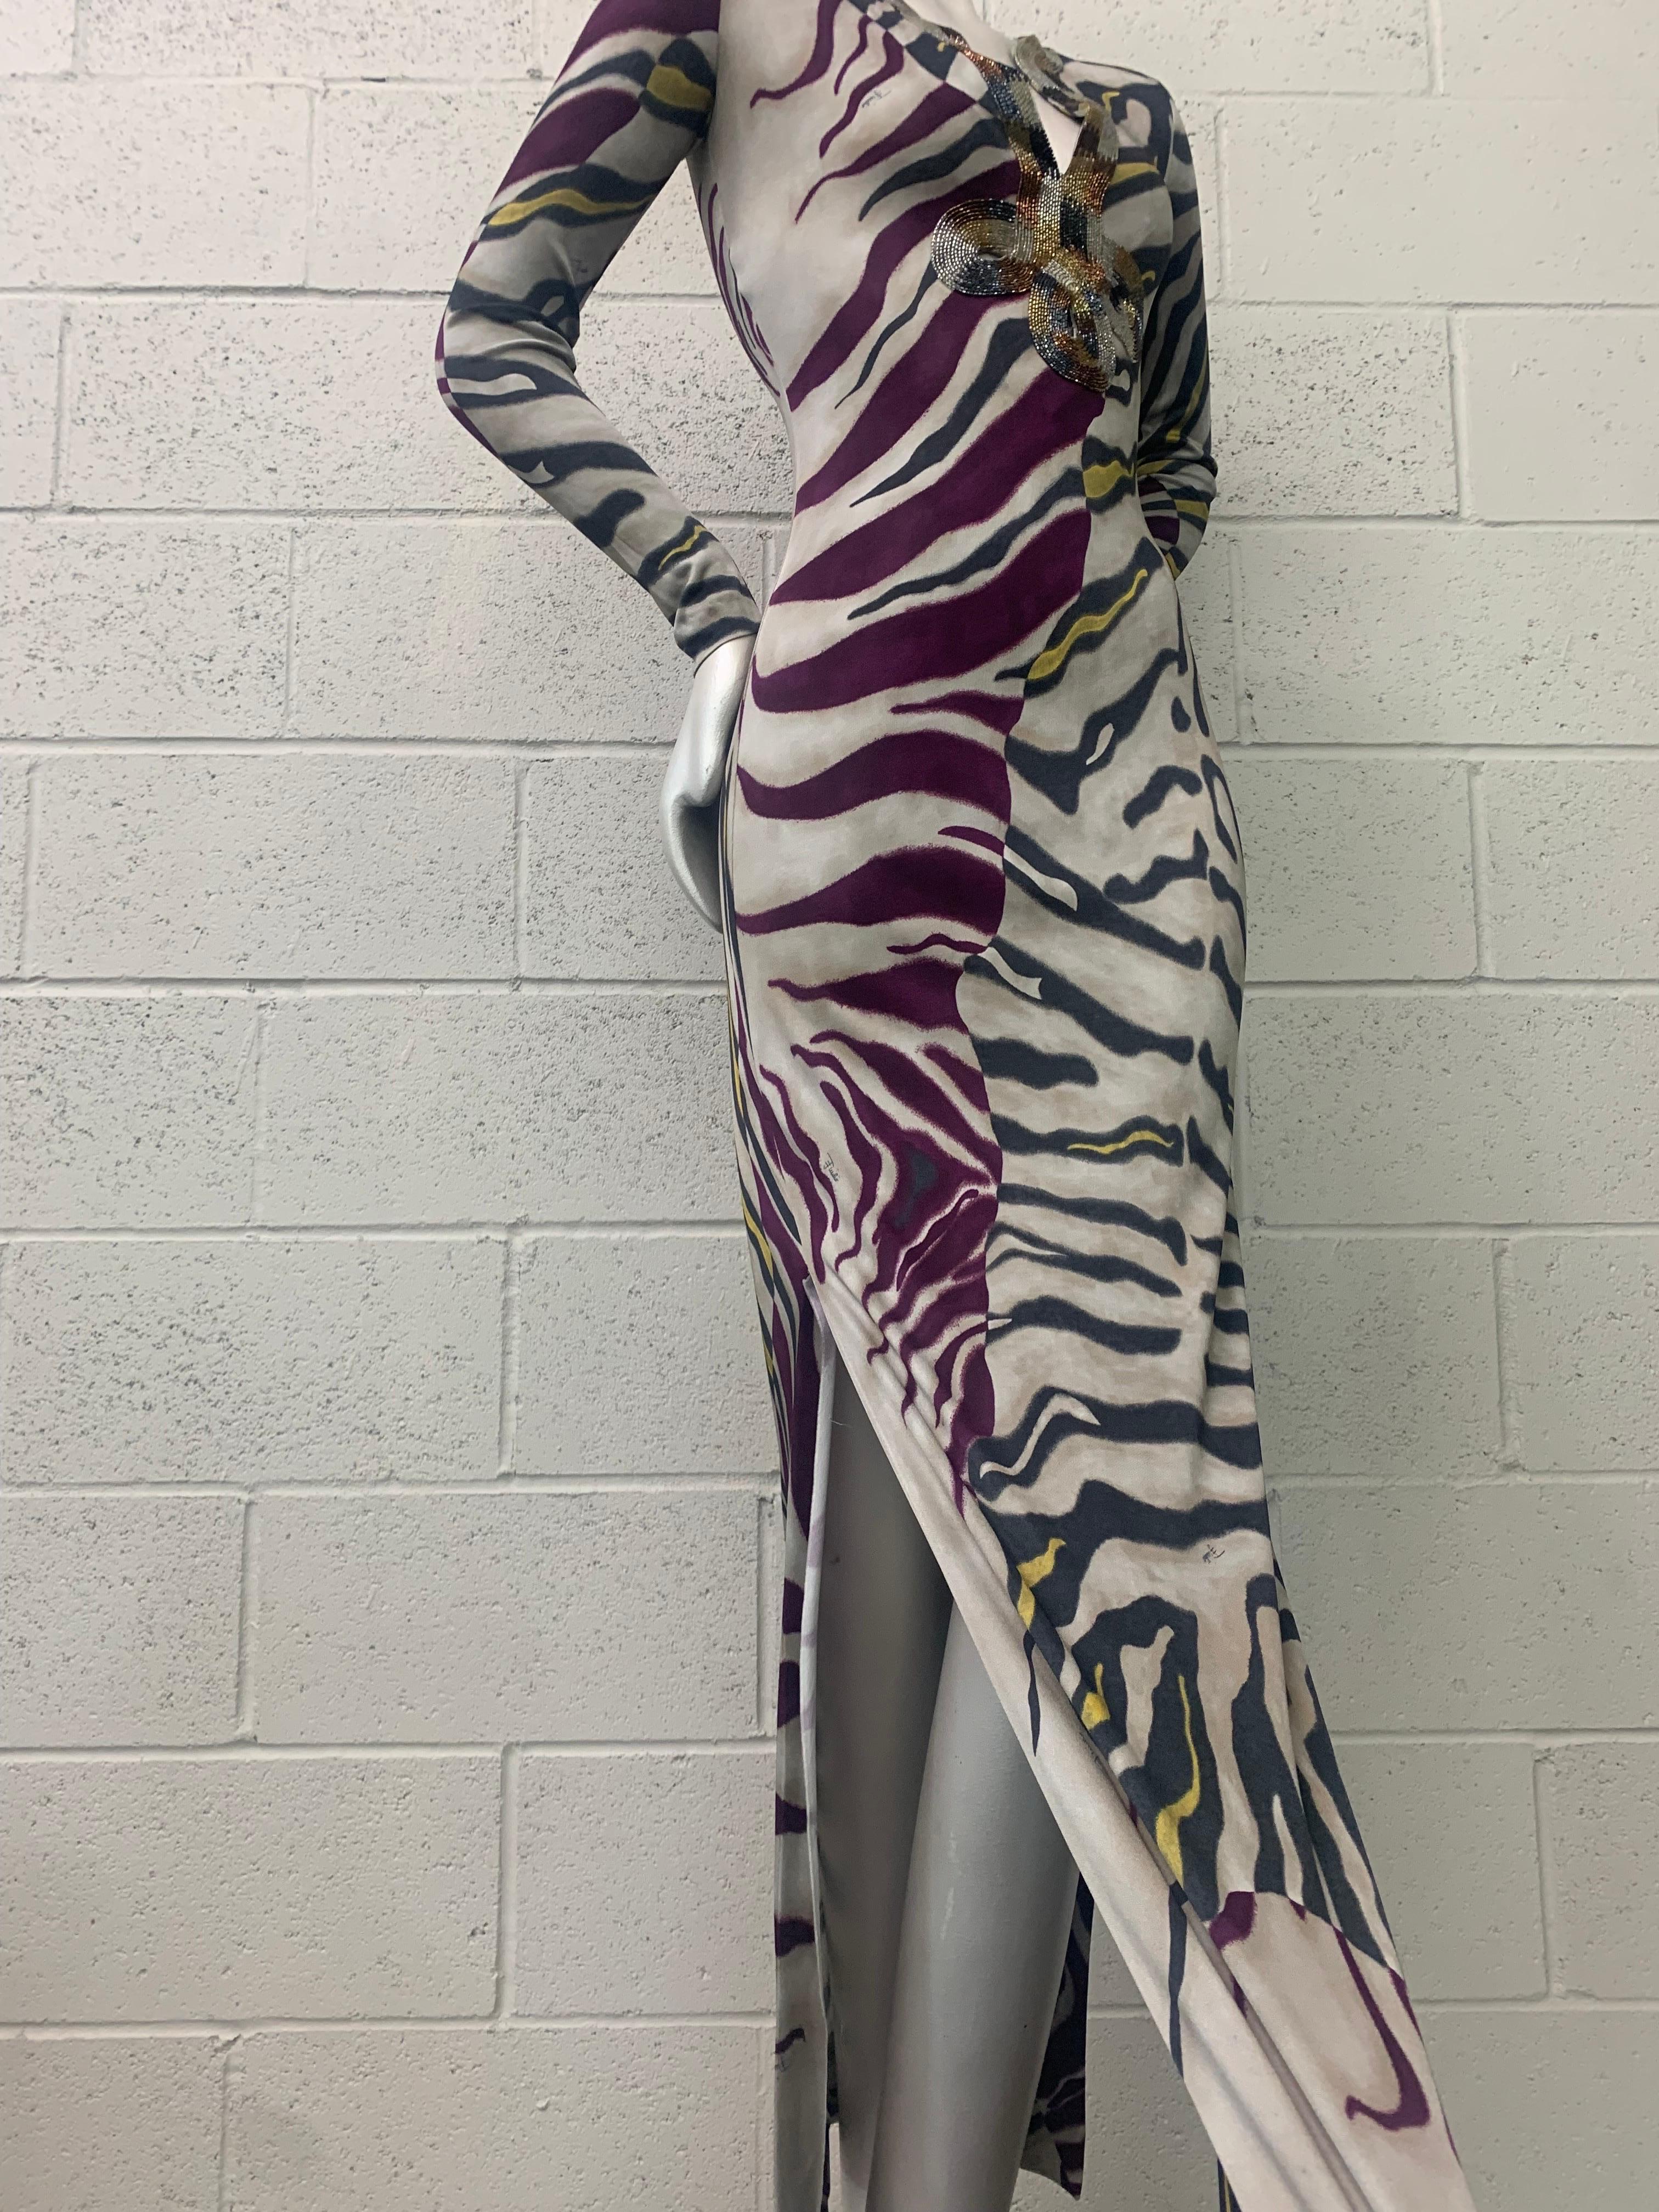 Emilio Pucci Stylized Zebra-Print Body-Conscious Beaded Maxi Dress in Rayon Knit For Sale 6